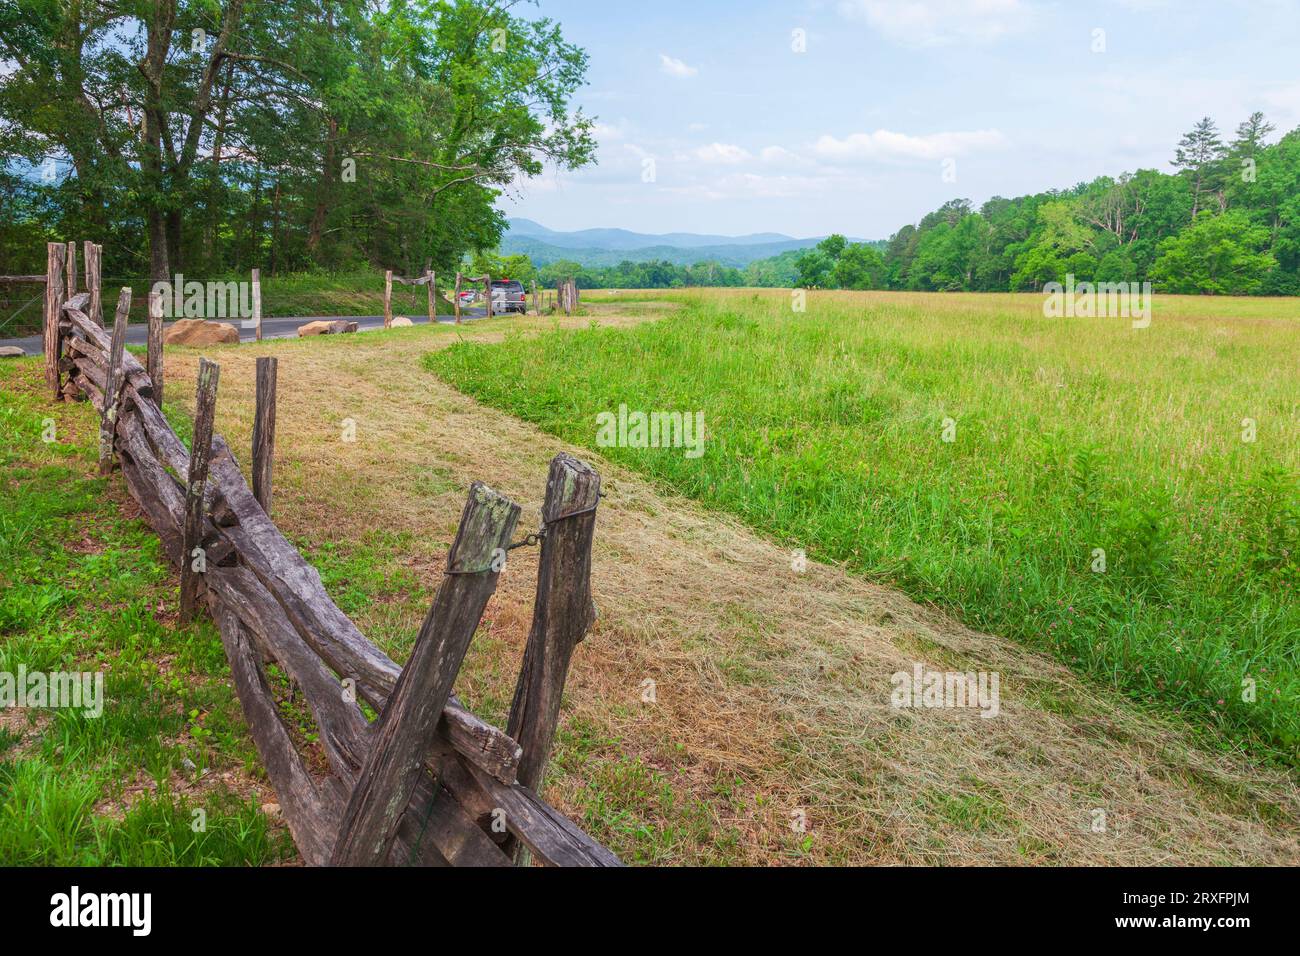 Fenceline and field at John Oliver place in Cades Cove village in the Great Smoky Mountain National Park in Tennessee. Stock Photo